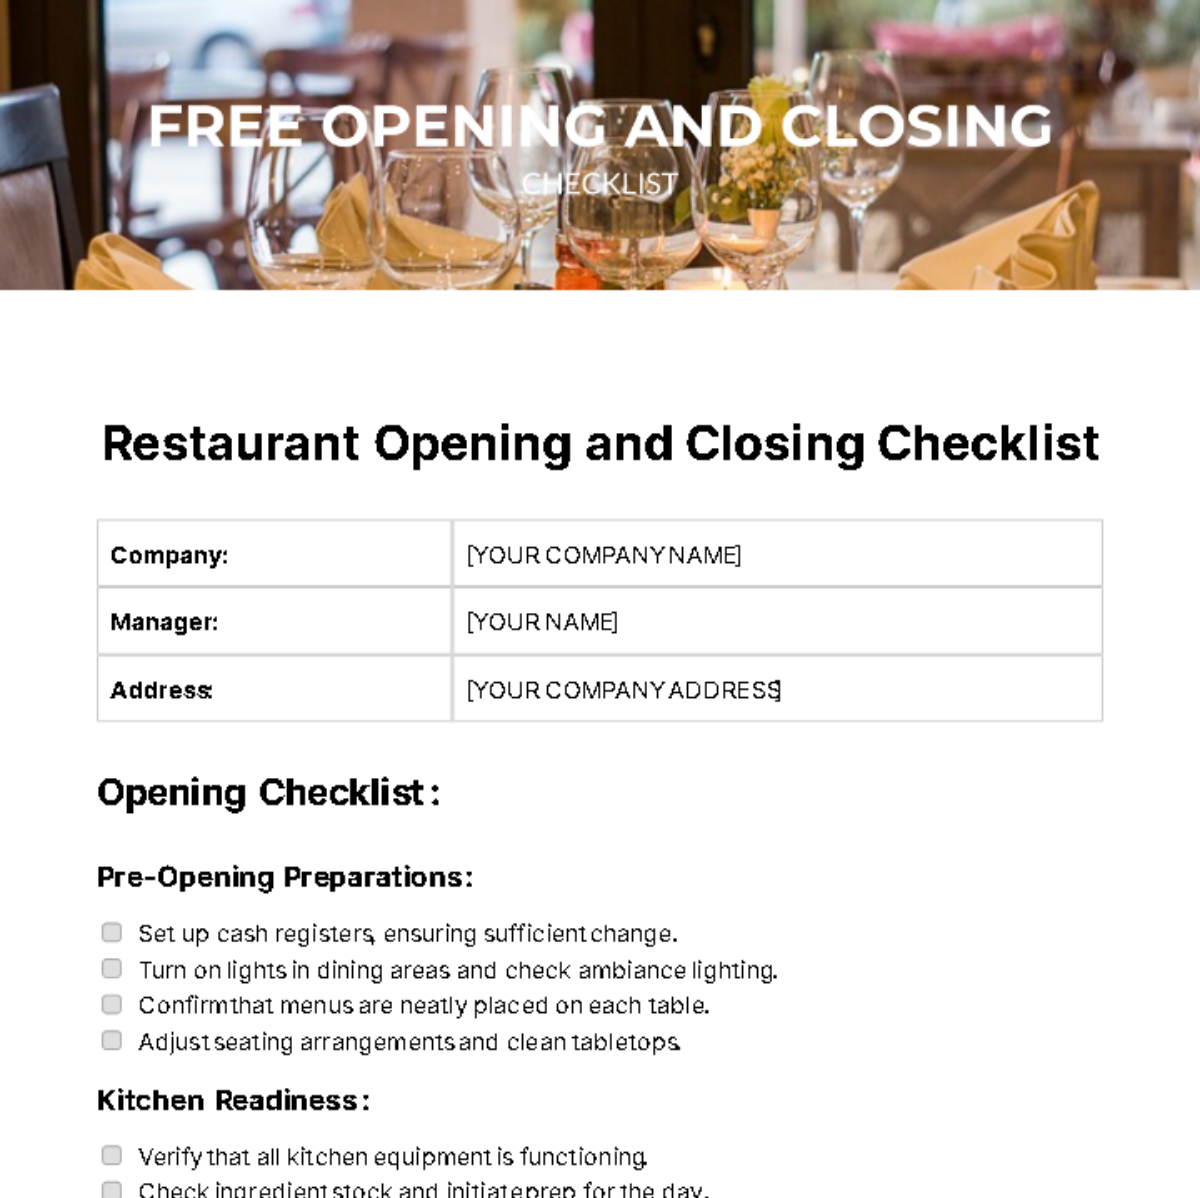 Free Opening and Closing Checklist Template